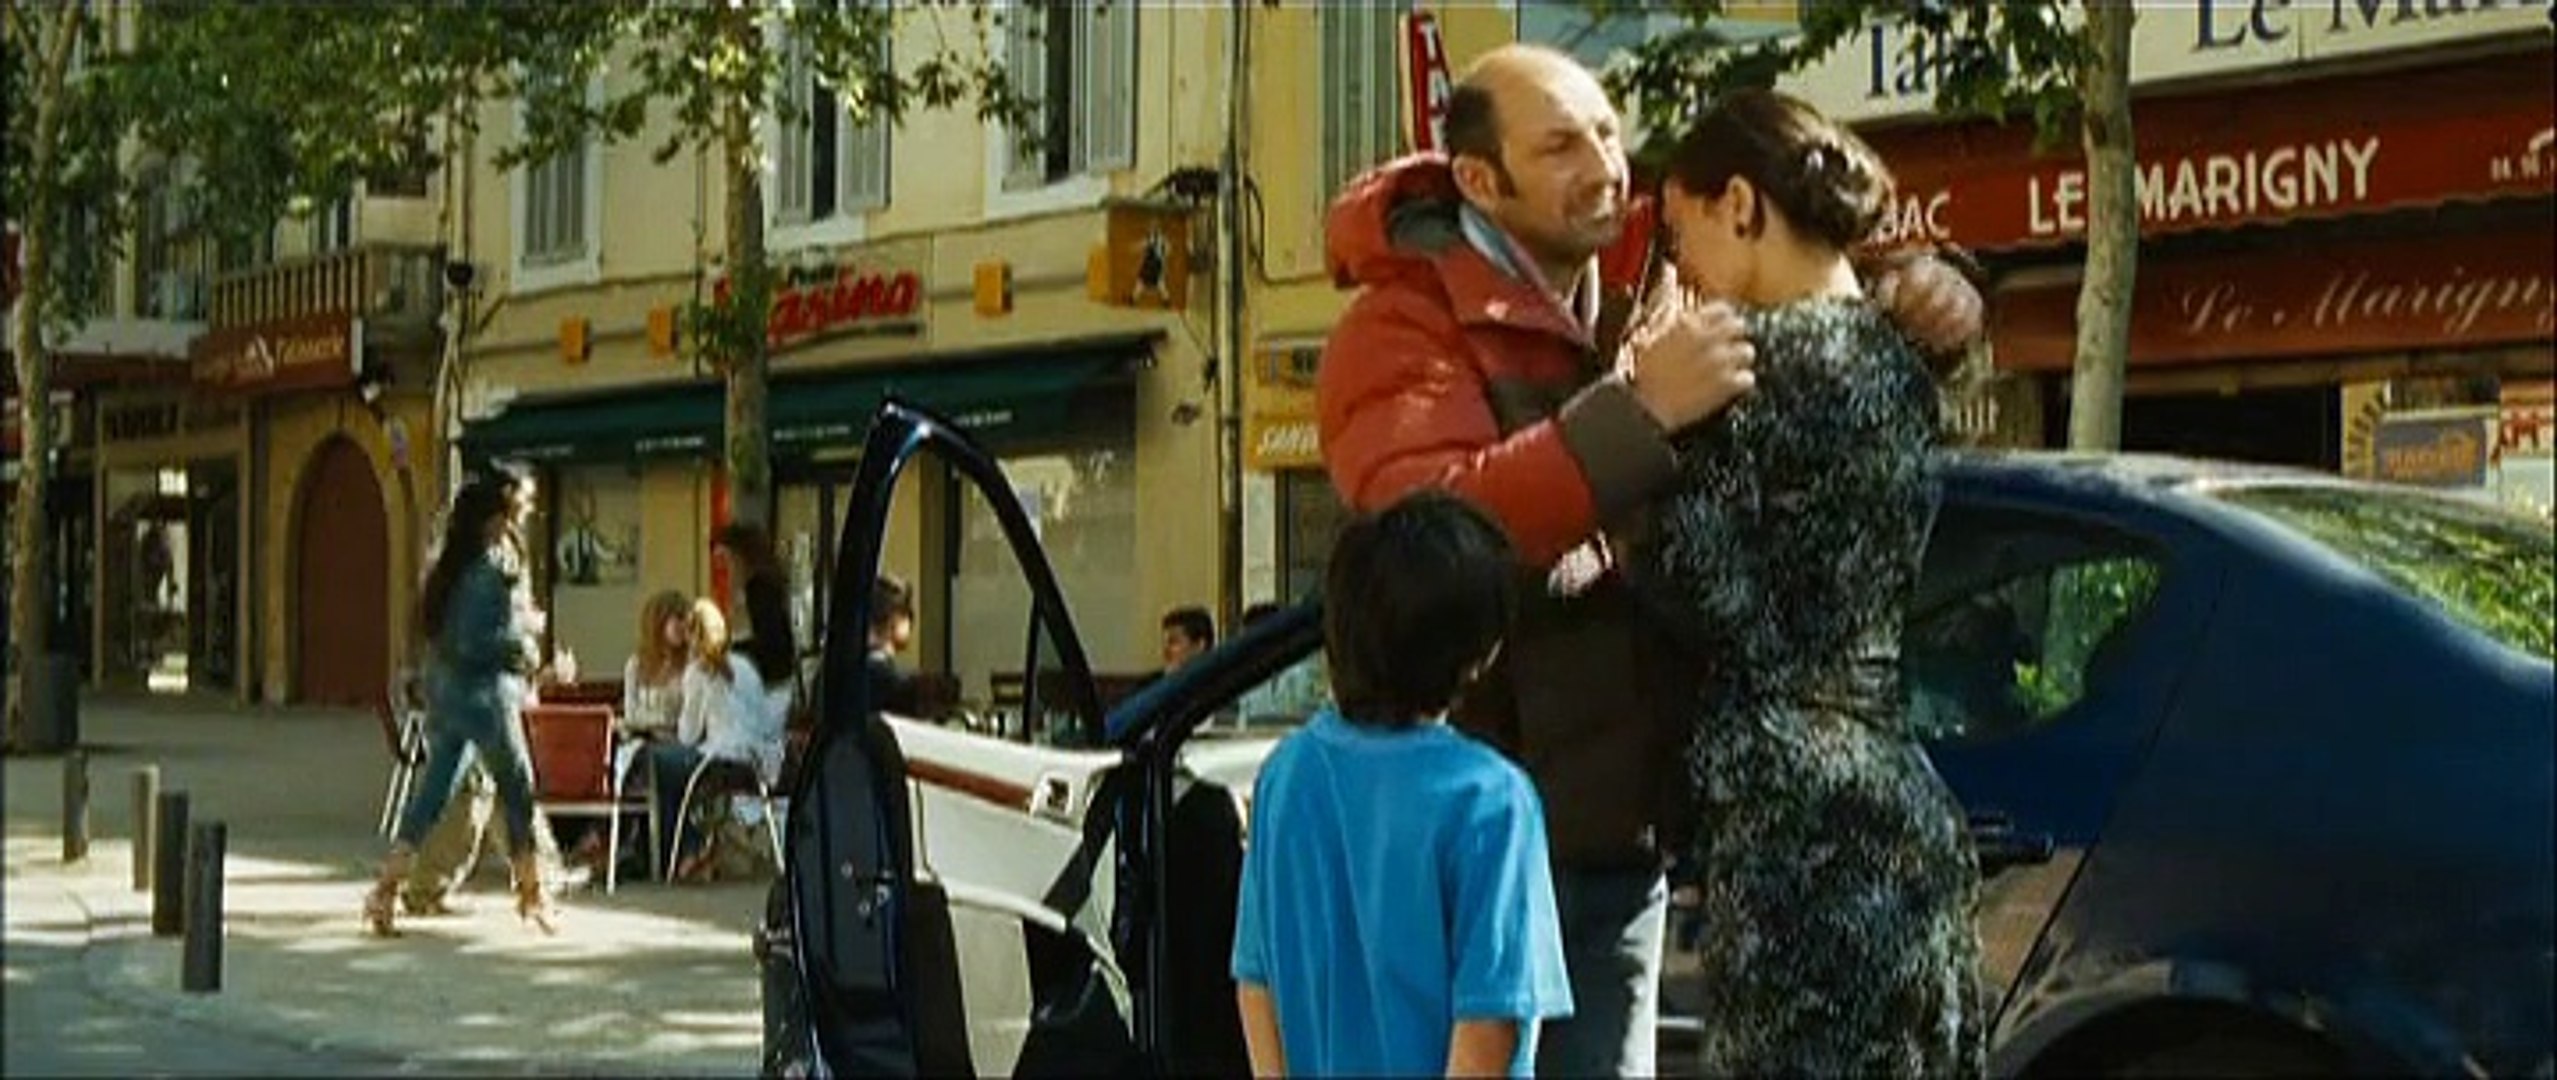 Welcome to the Land of Ch'tis / Bienvenue chez les Ch'tis (2008) - French  trailer - Vidéo Dailymotion